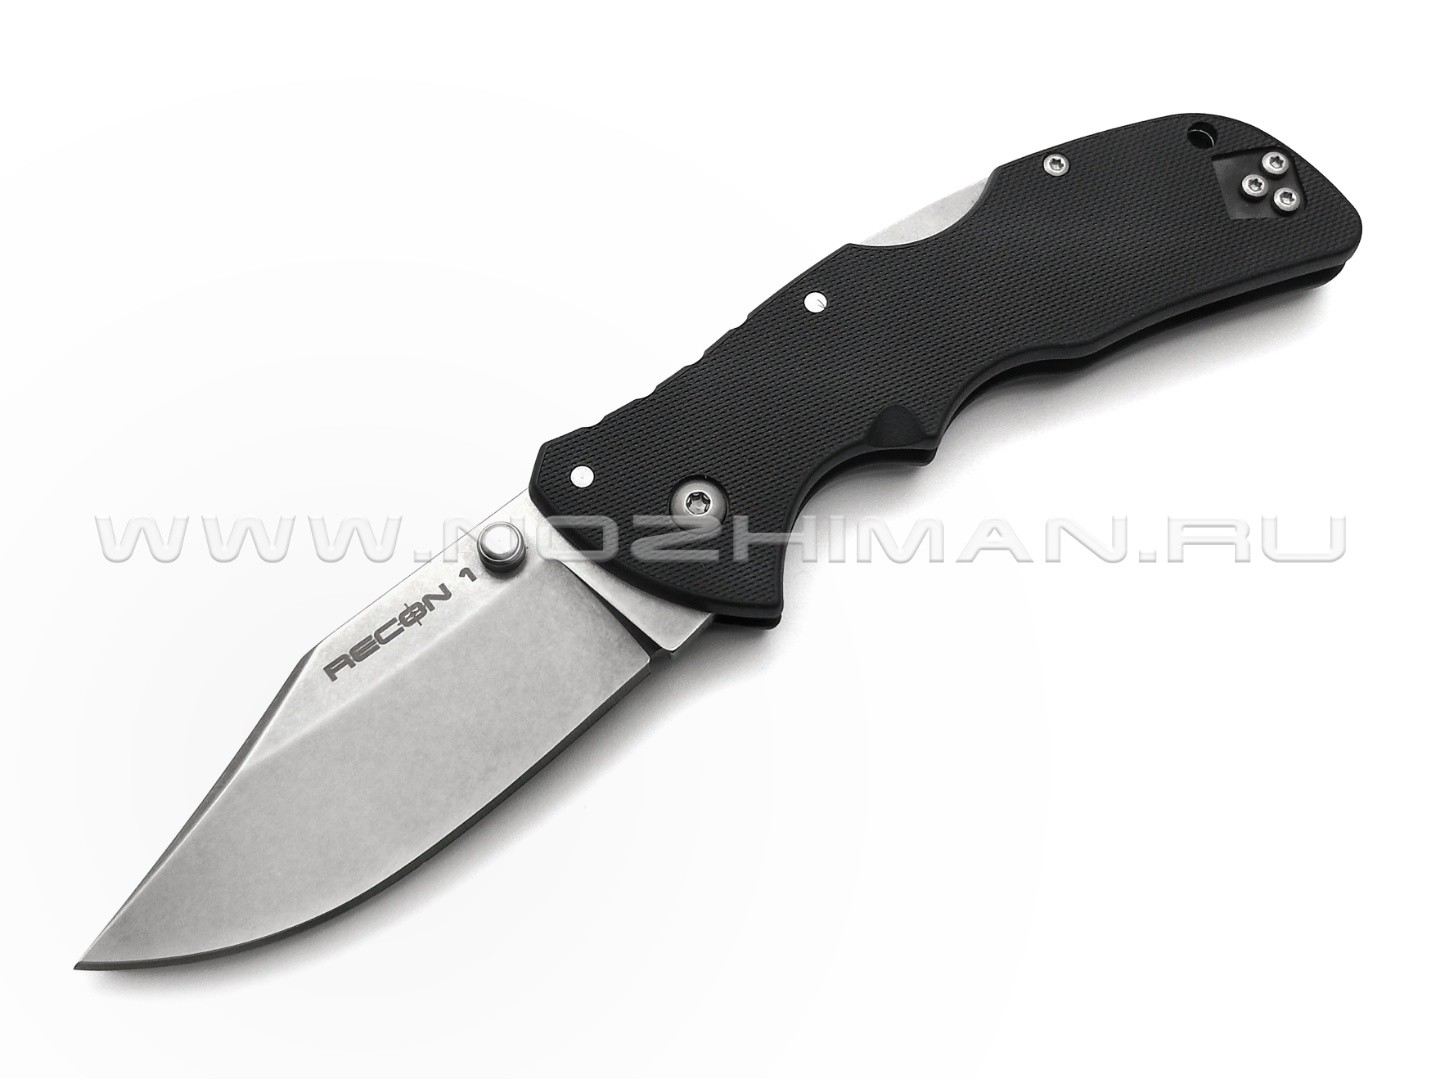 Cold Steel нож Mini Recon 1 Clip Point 27BAC сталь Aus 10A, рукоять GRN